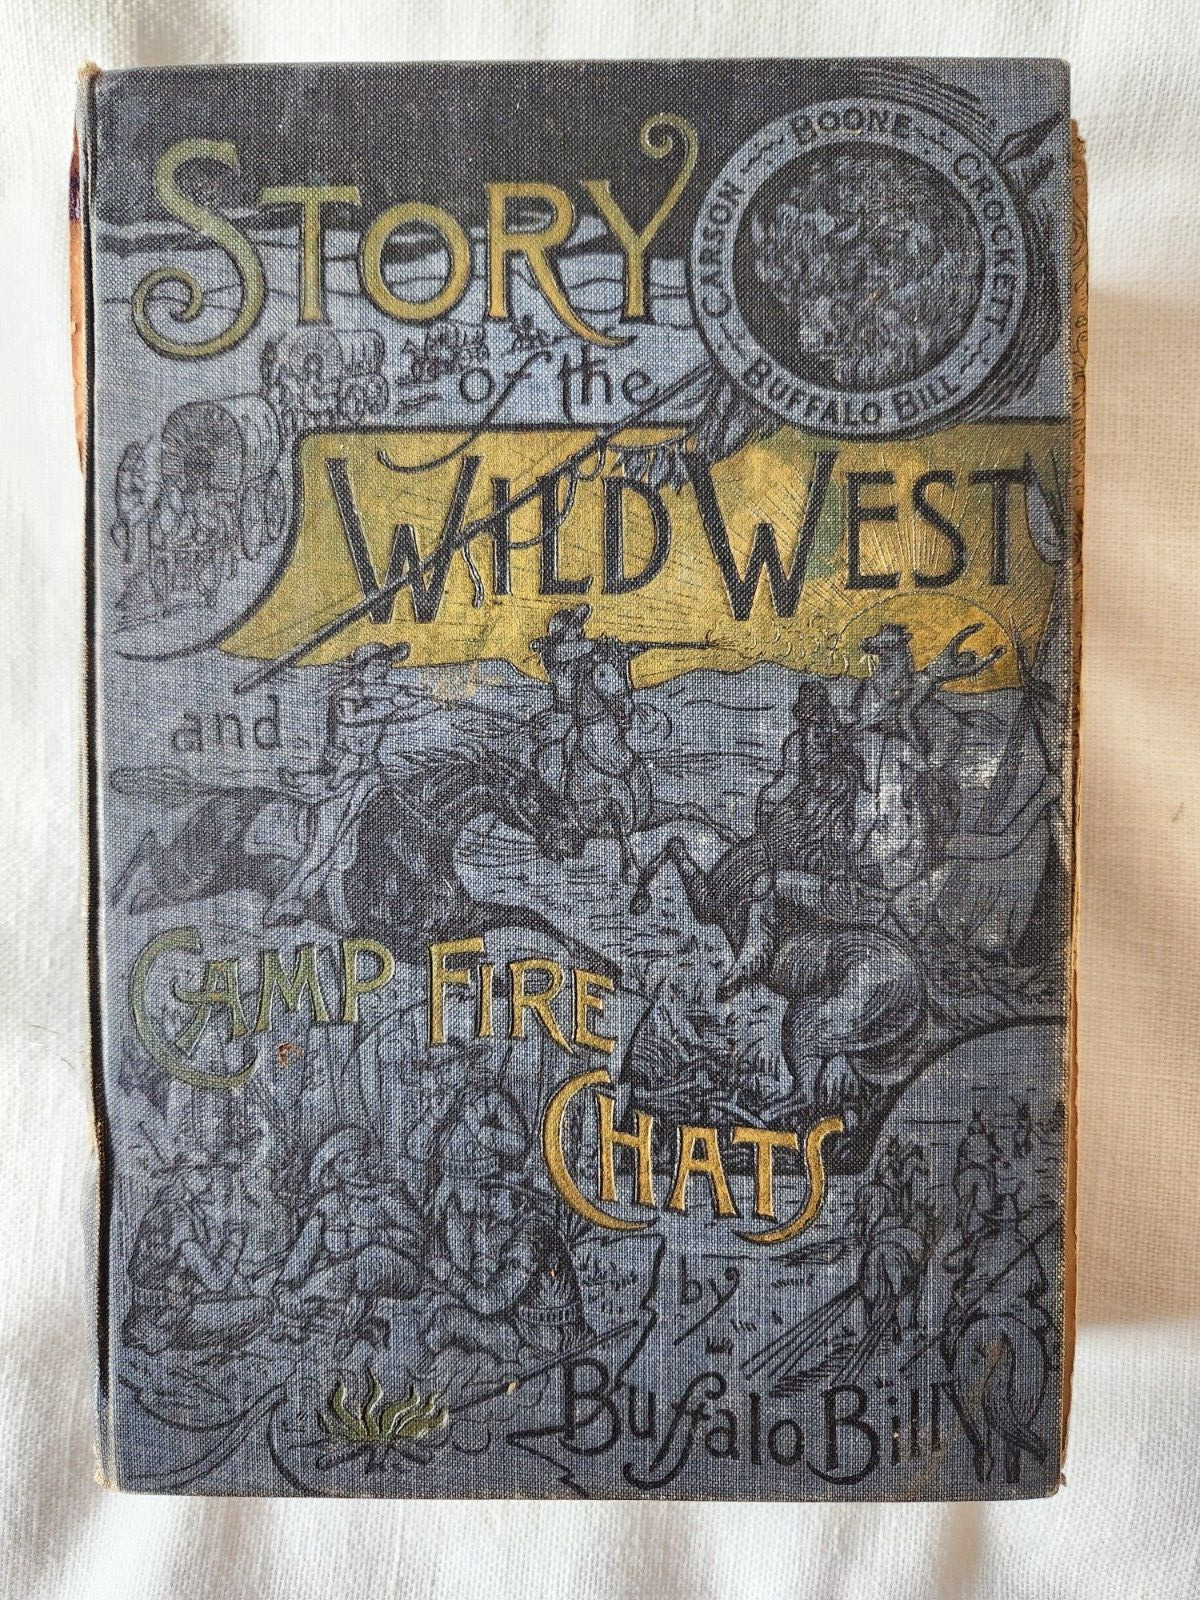 Story of the Wild West & Camp-Fire Chats by Buffalo Bill Hardcover 1888